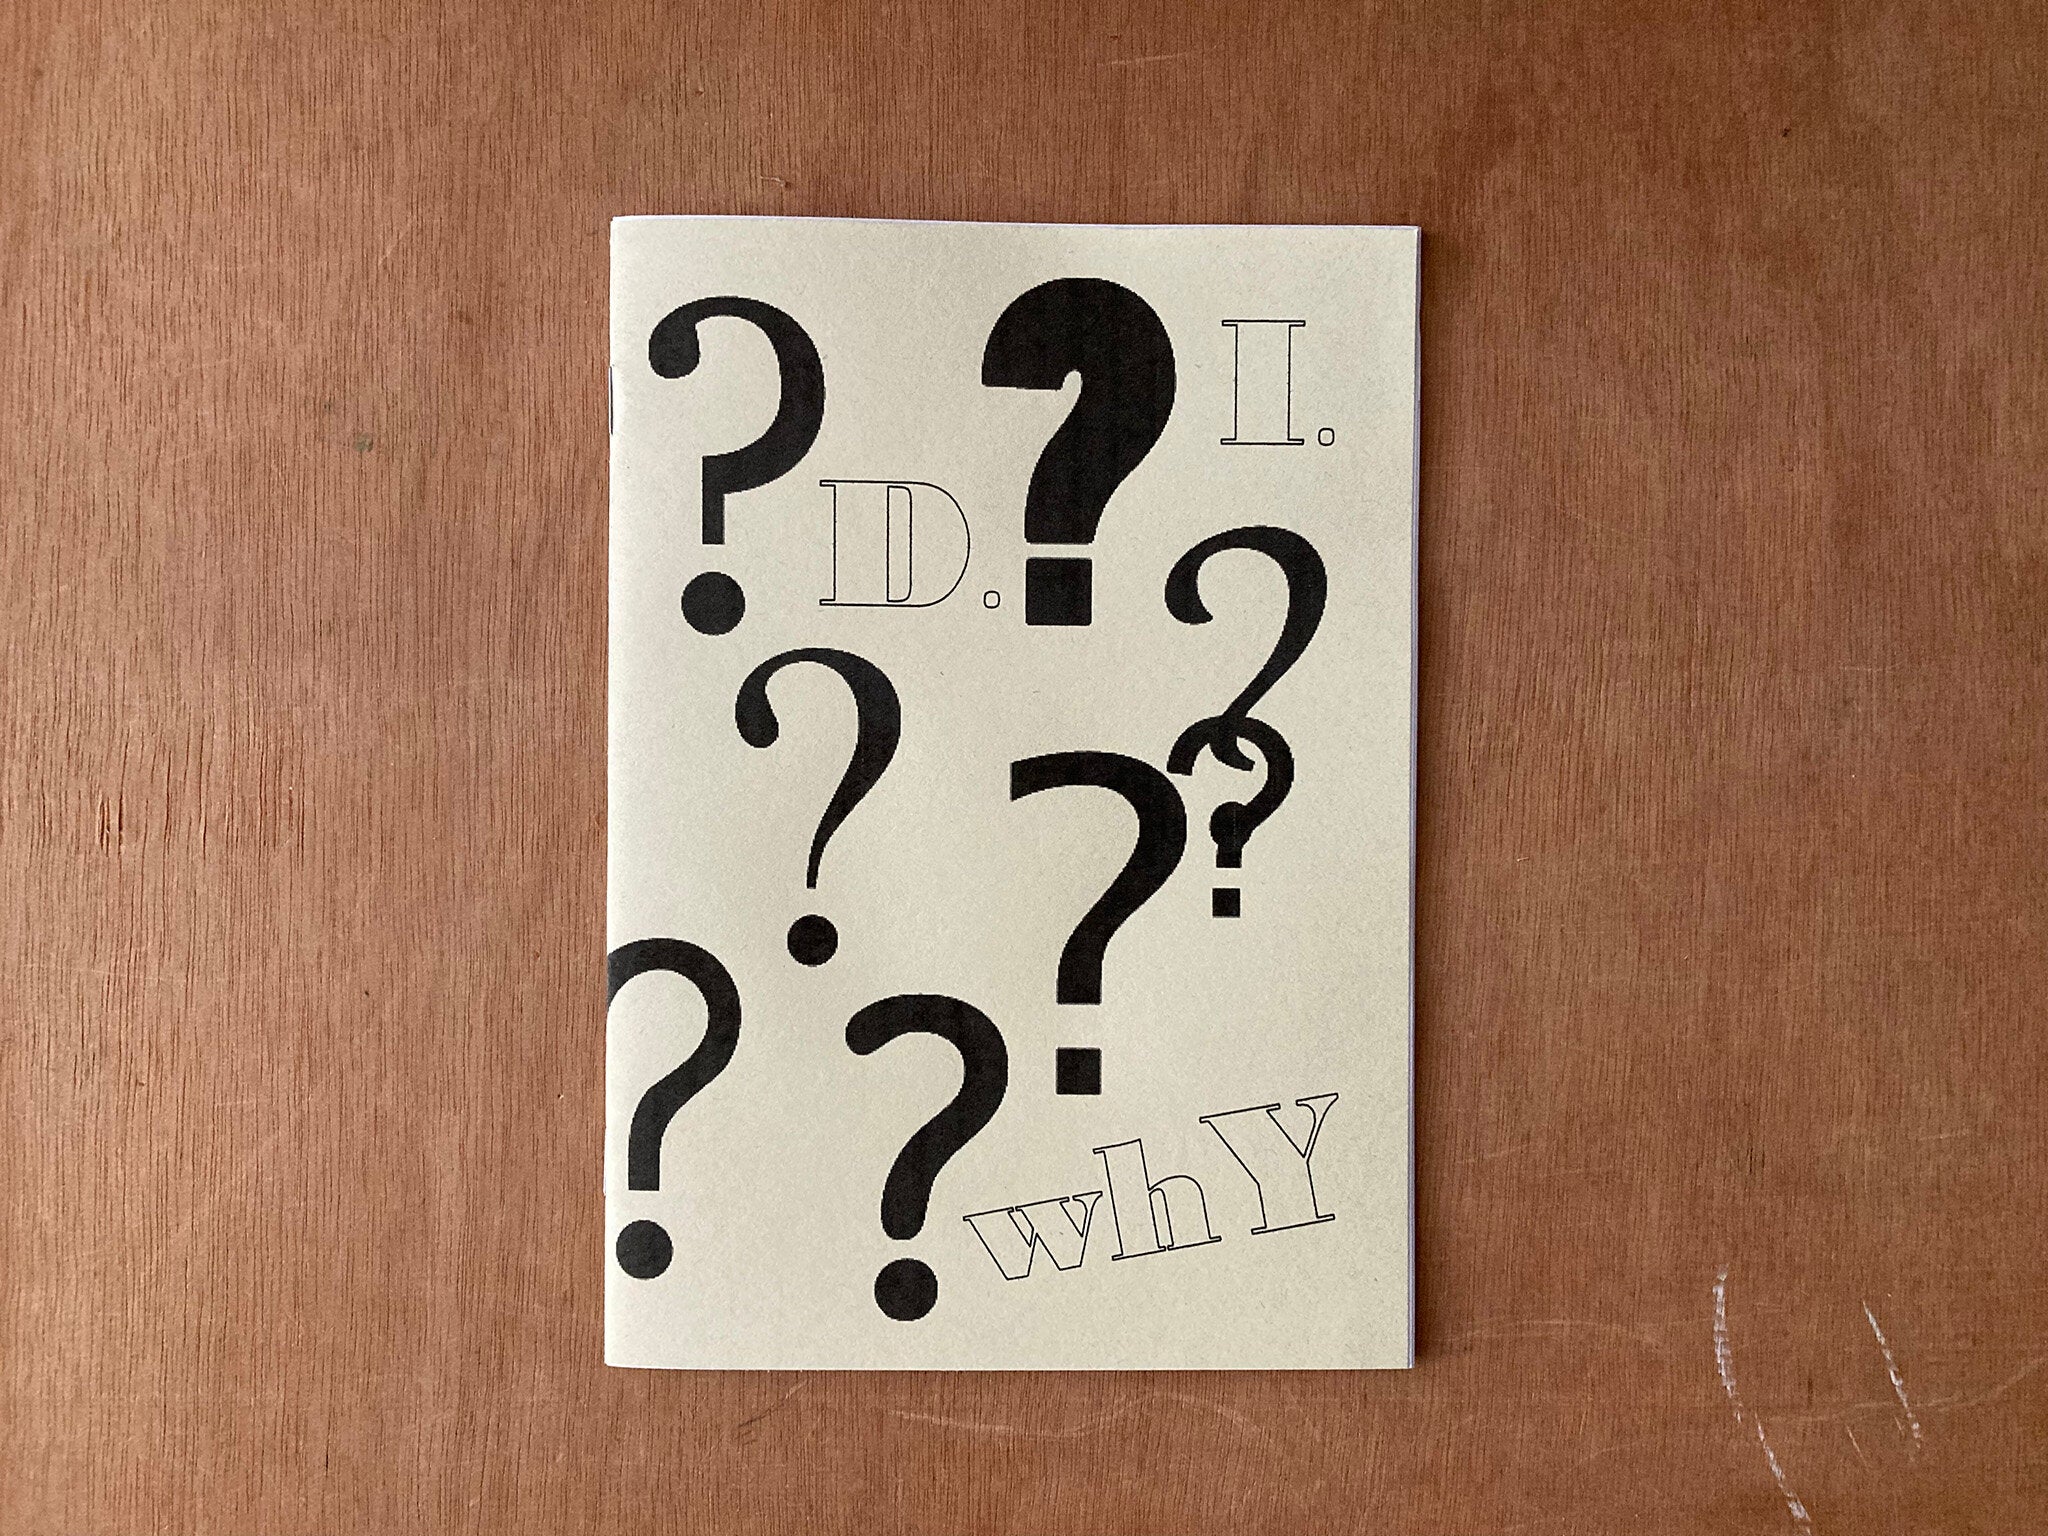 D I whY? edited by Dave Emmerson